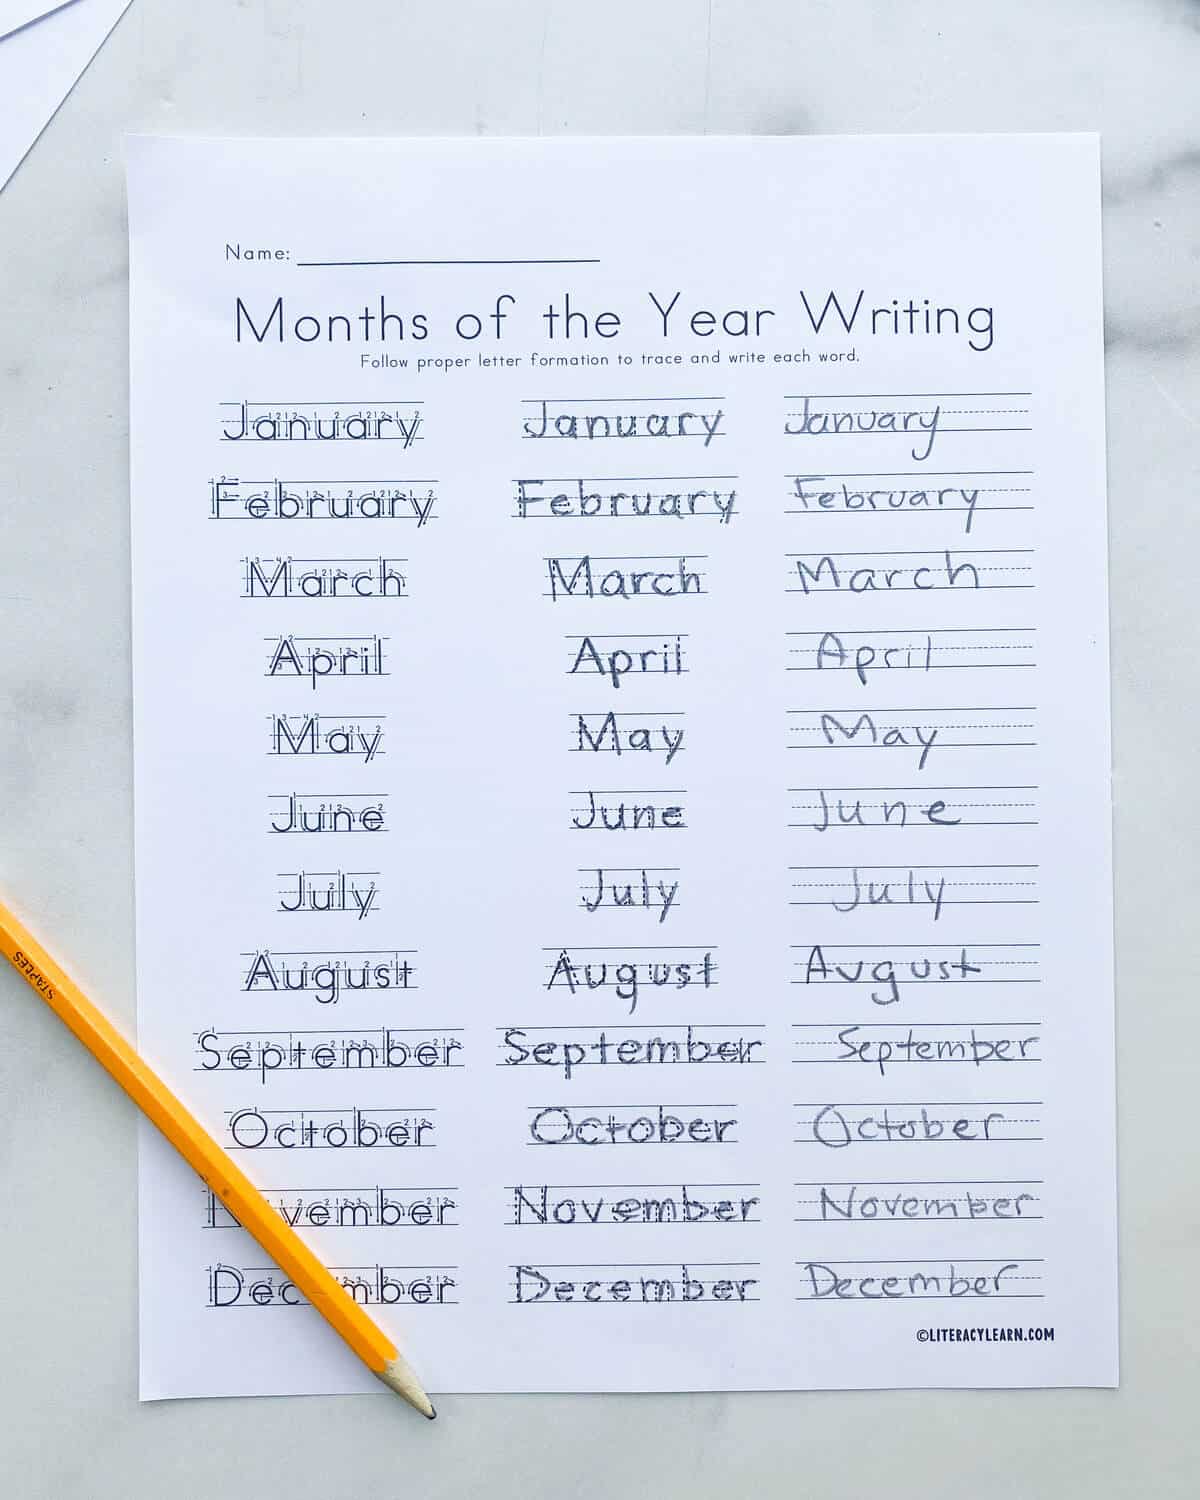 Finished worksheet with the months of the year traced then written out. 